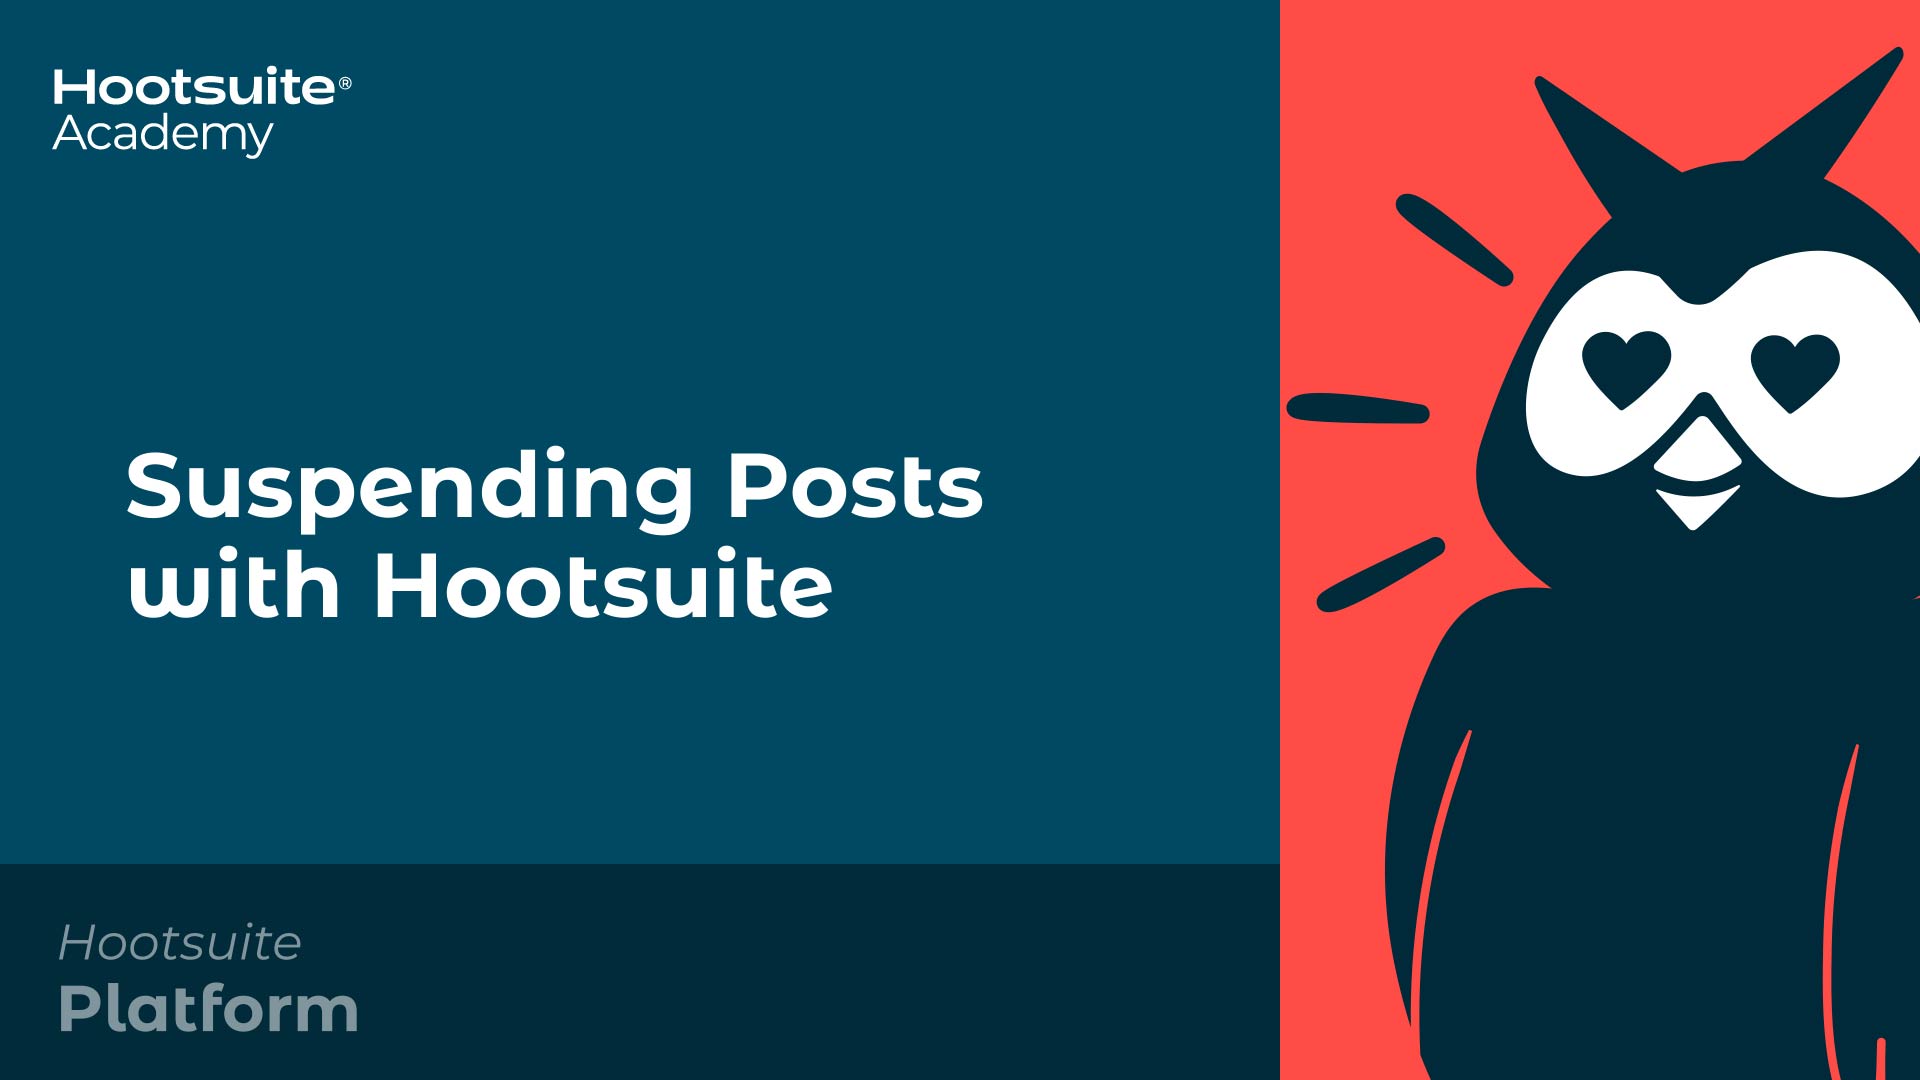 Suspending posts with Hootsuite video